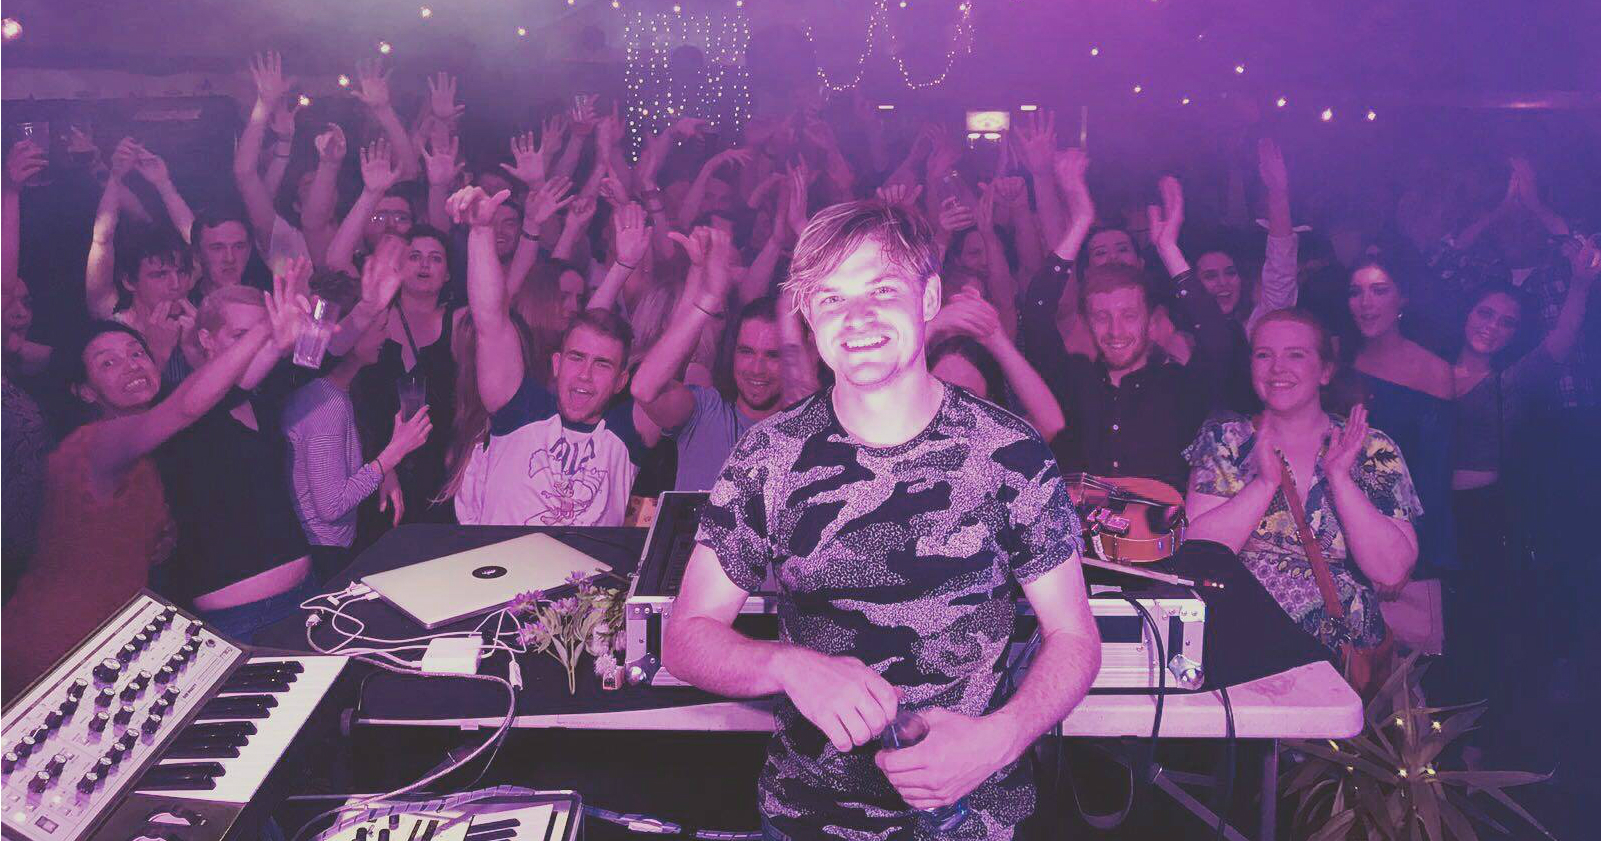 Dj Daithí stands in front of a crowd in a club